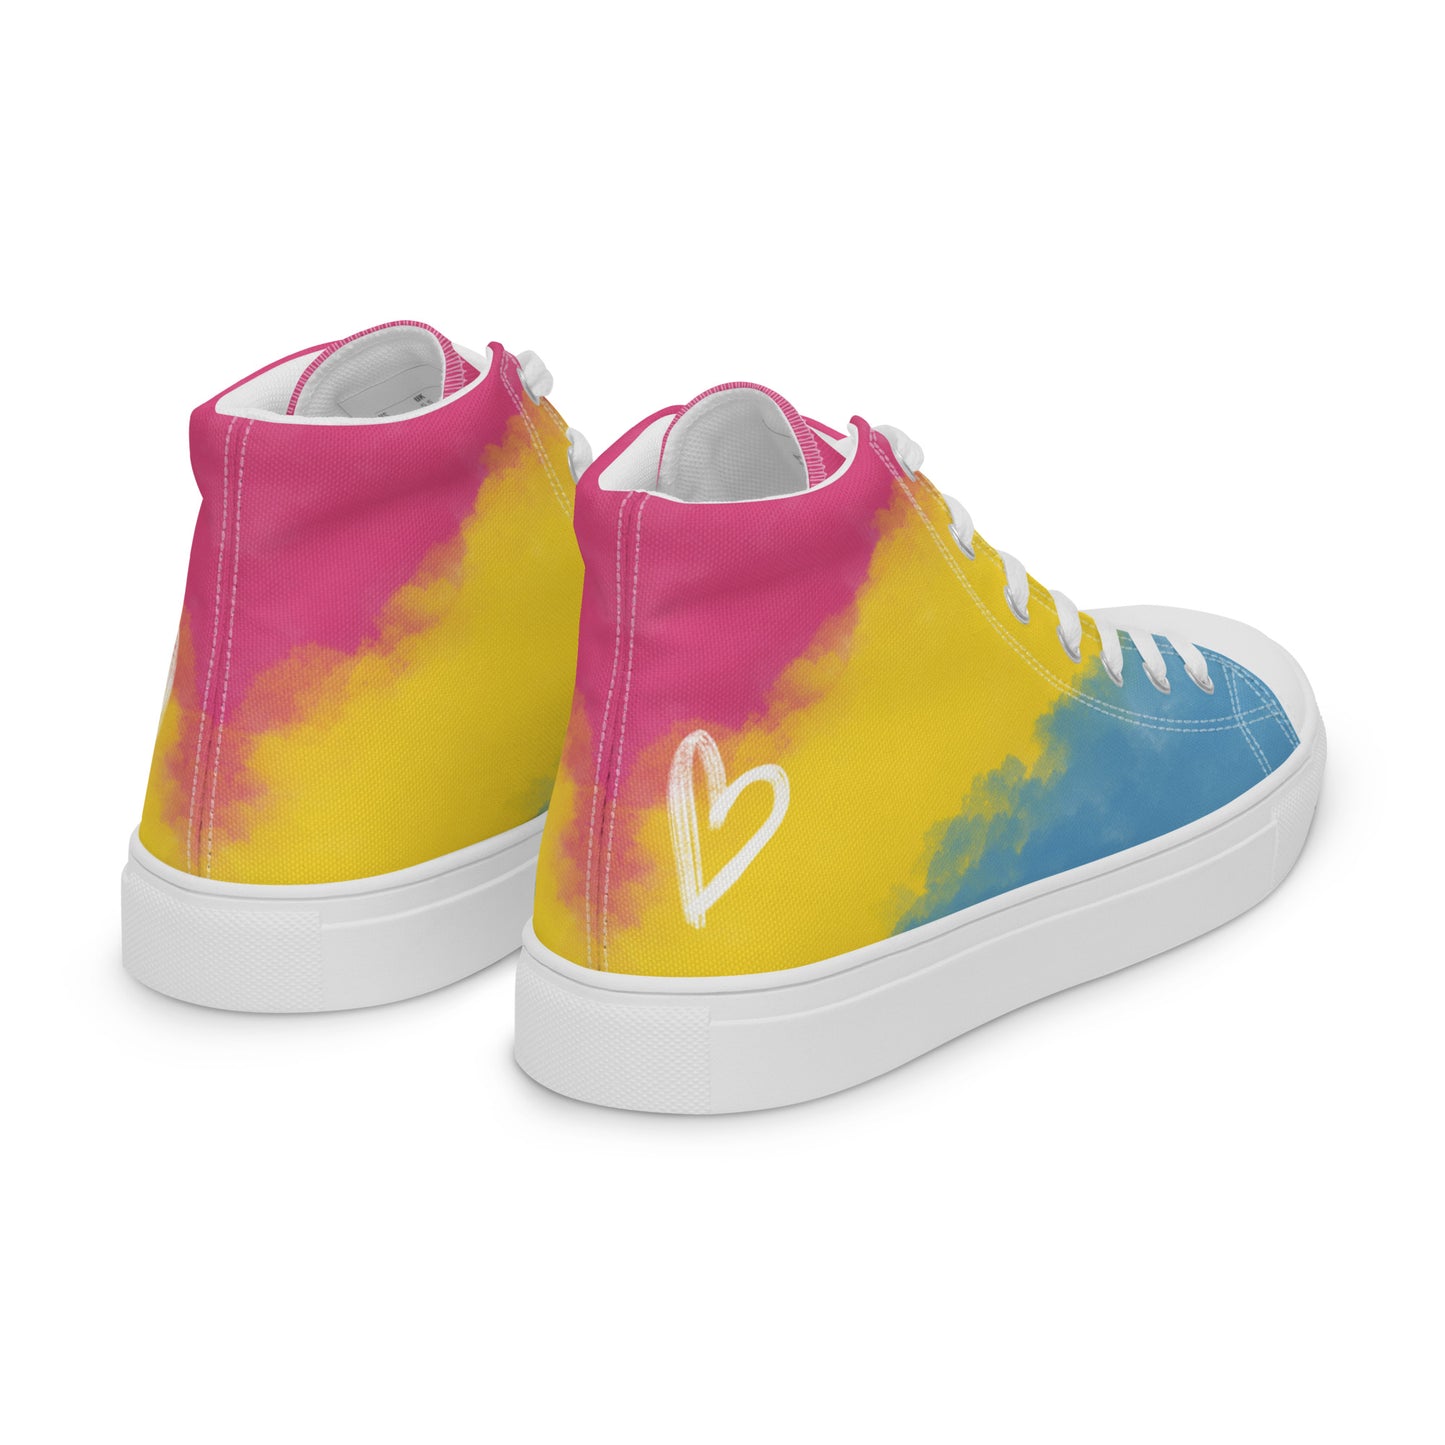 Right back view: a pair of high top shoes with color block pink, yellow, and blue clouds, a white hand drawn heart, and the Aras Sivad logo on the back.